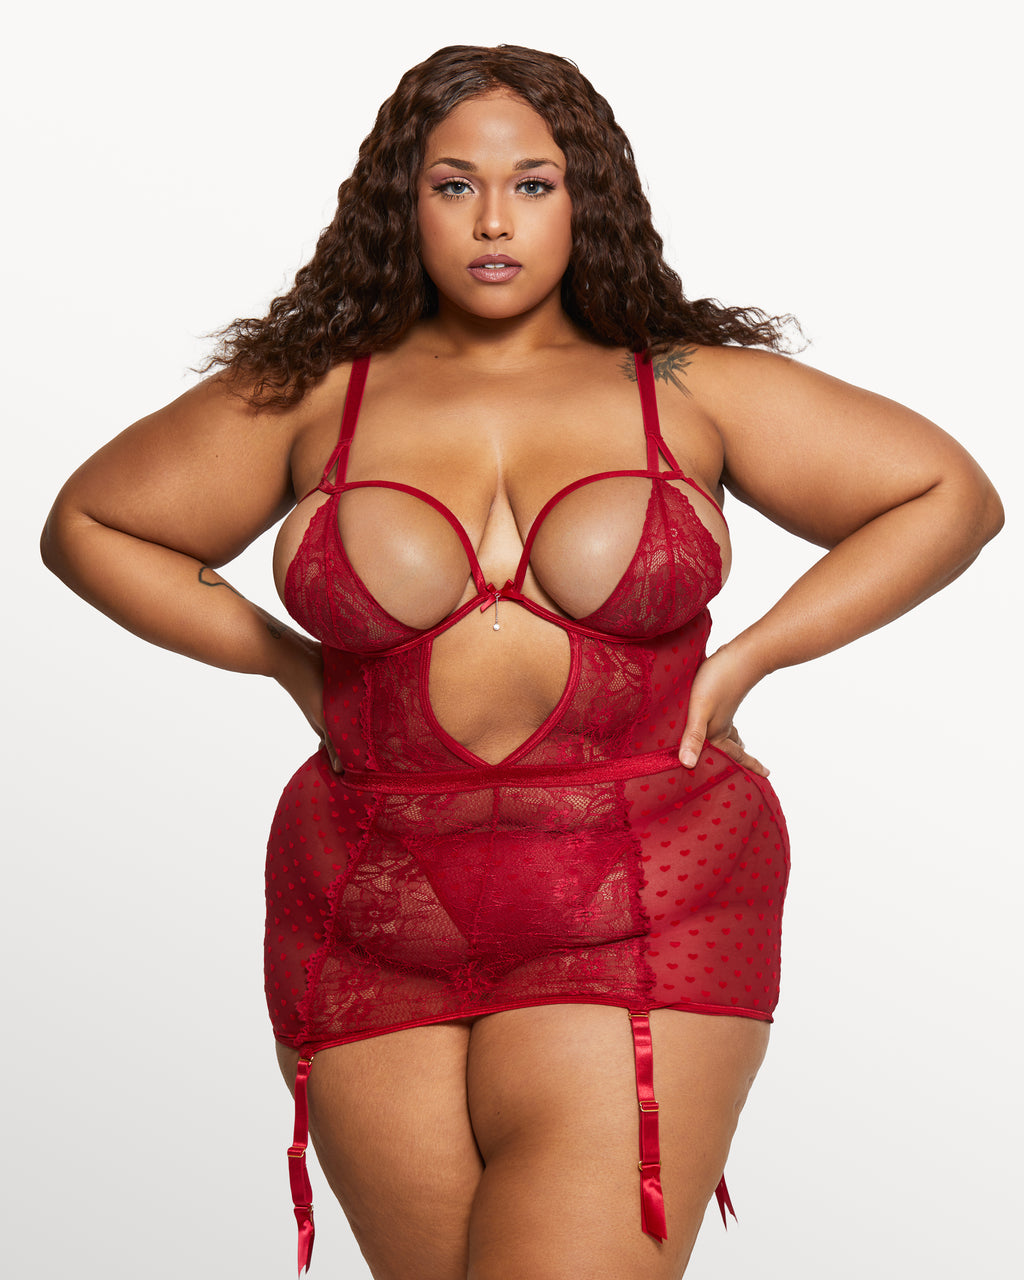 Pictures Of Curvy Girls In Lingerie